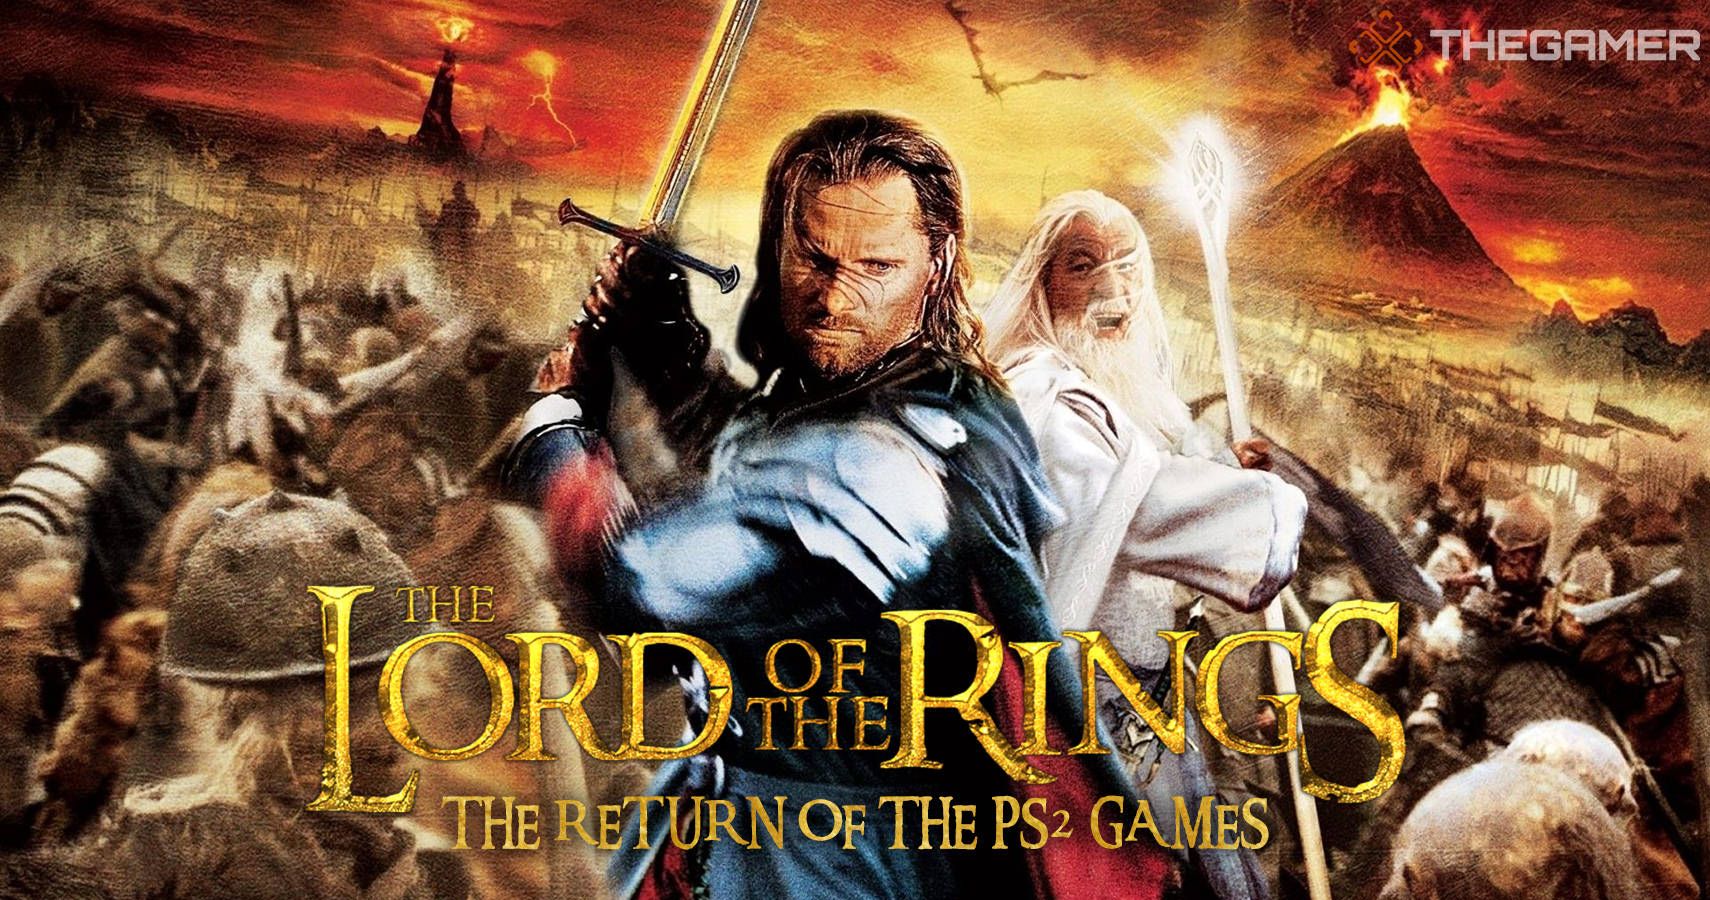 Flourish myg inden længe Fans Want The PS2 Lord Of The Rings Games To Return